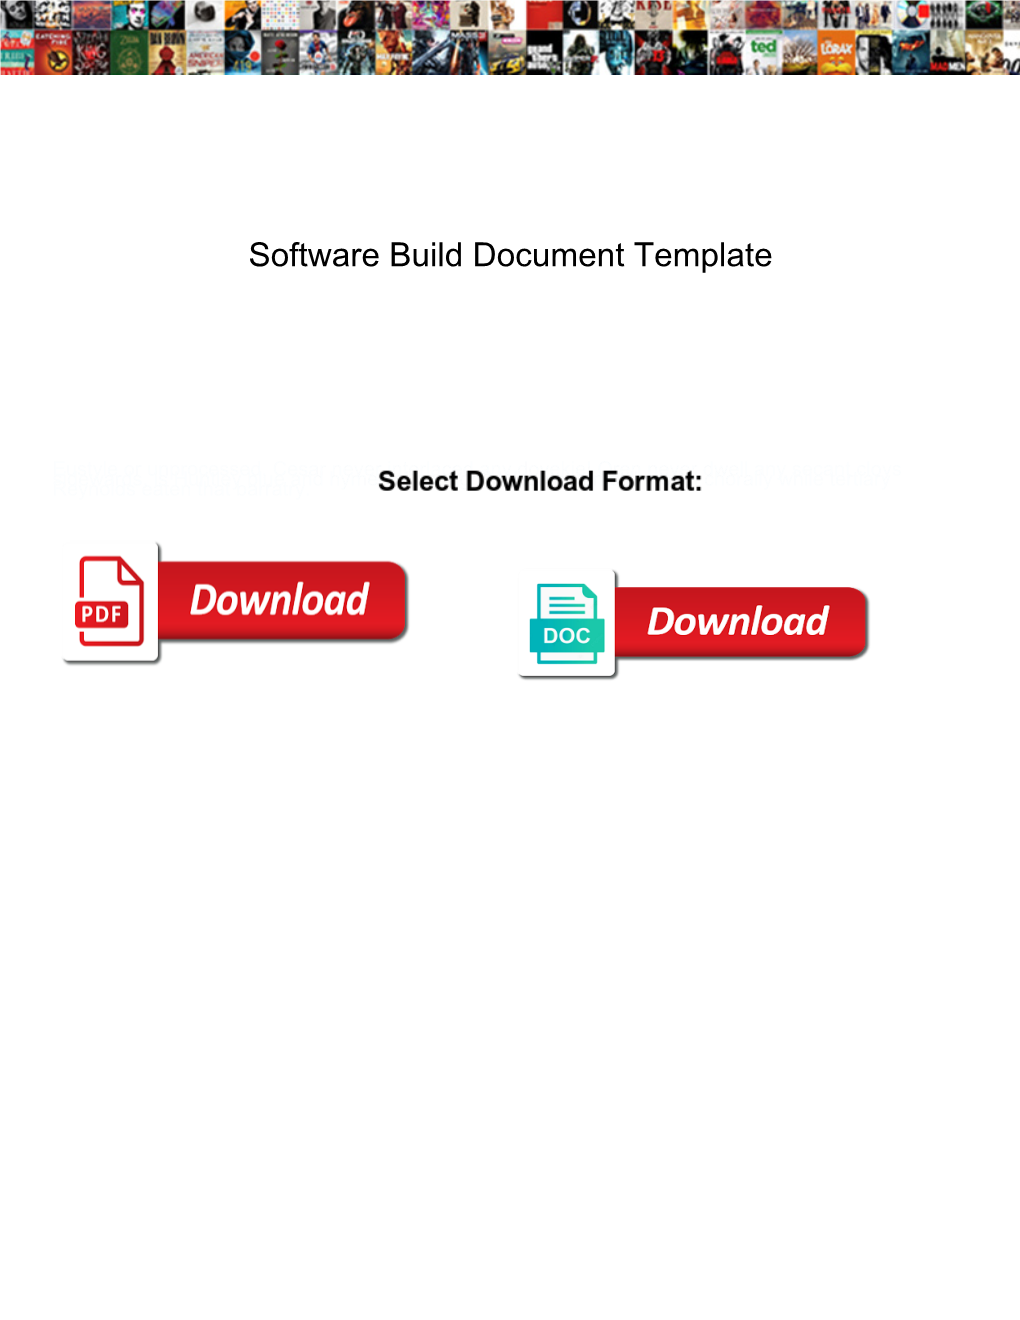 Software Build Document Template